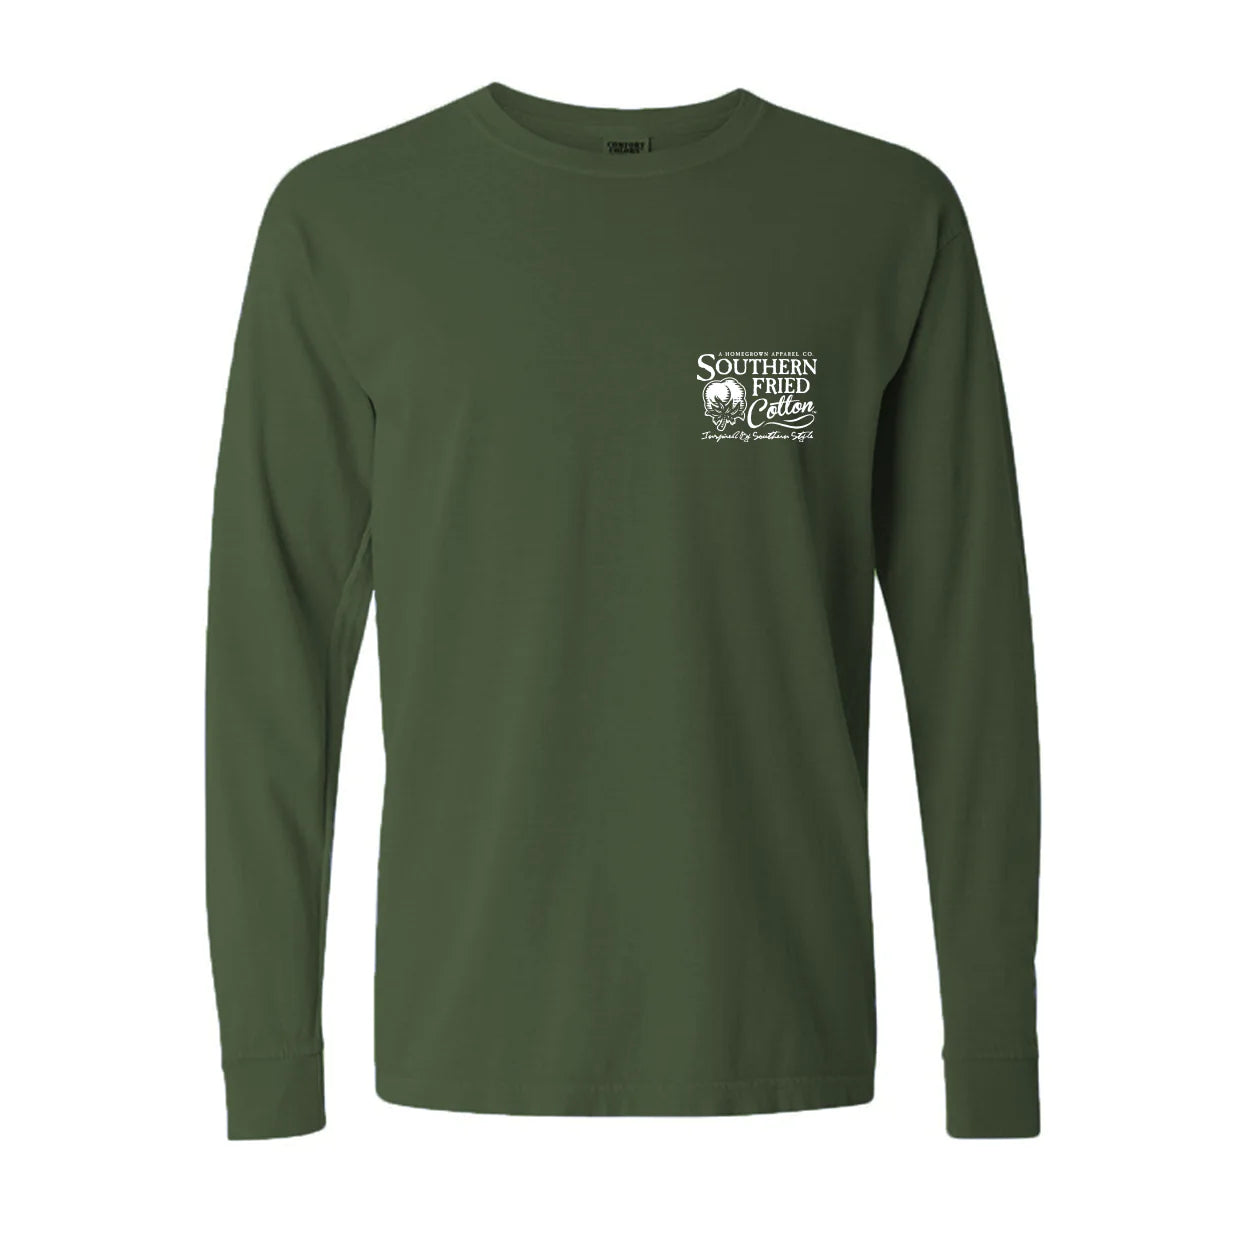 Dressed to Hunt Long Sleeve T-Shirt